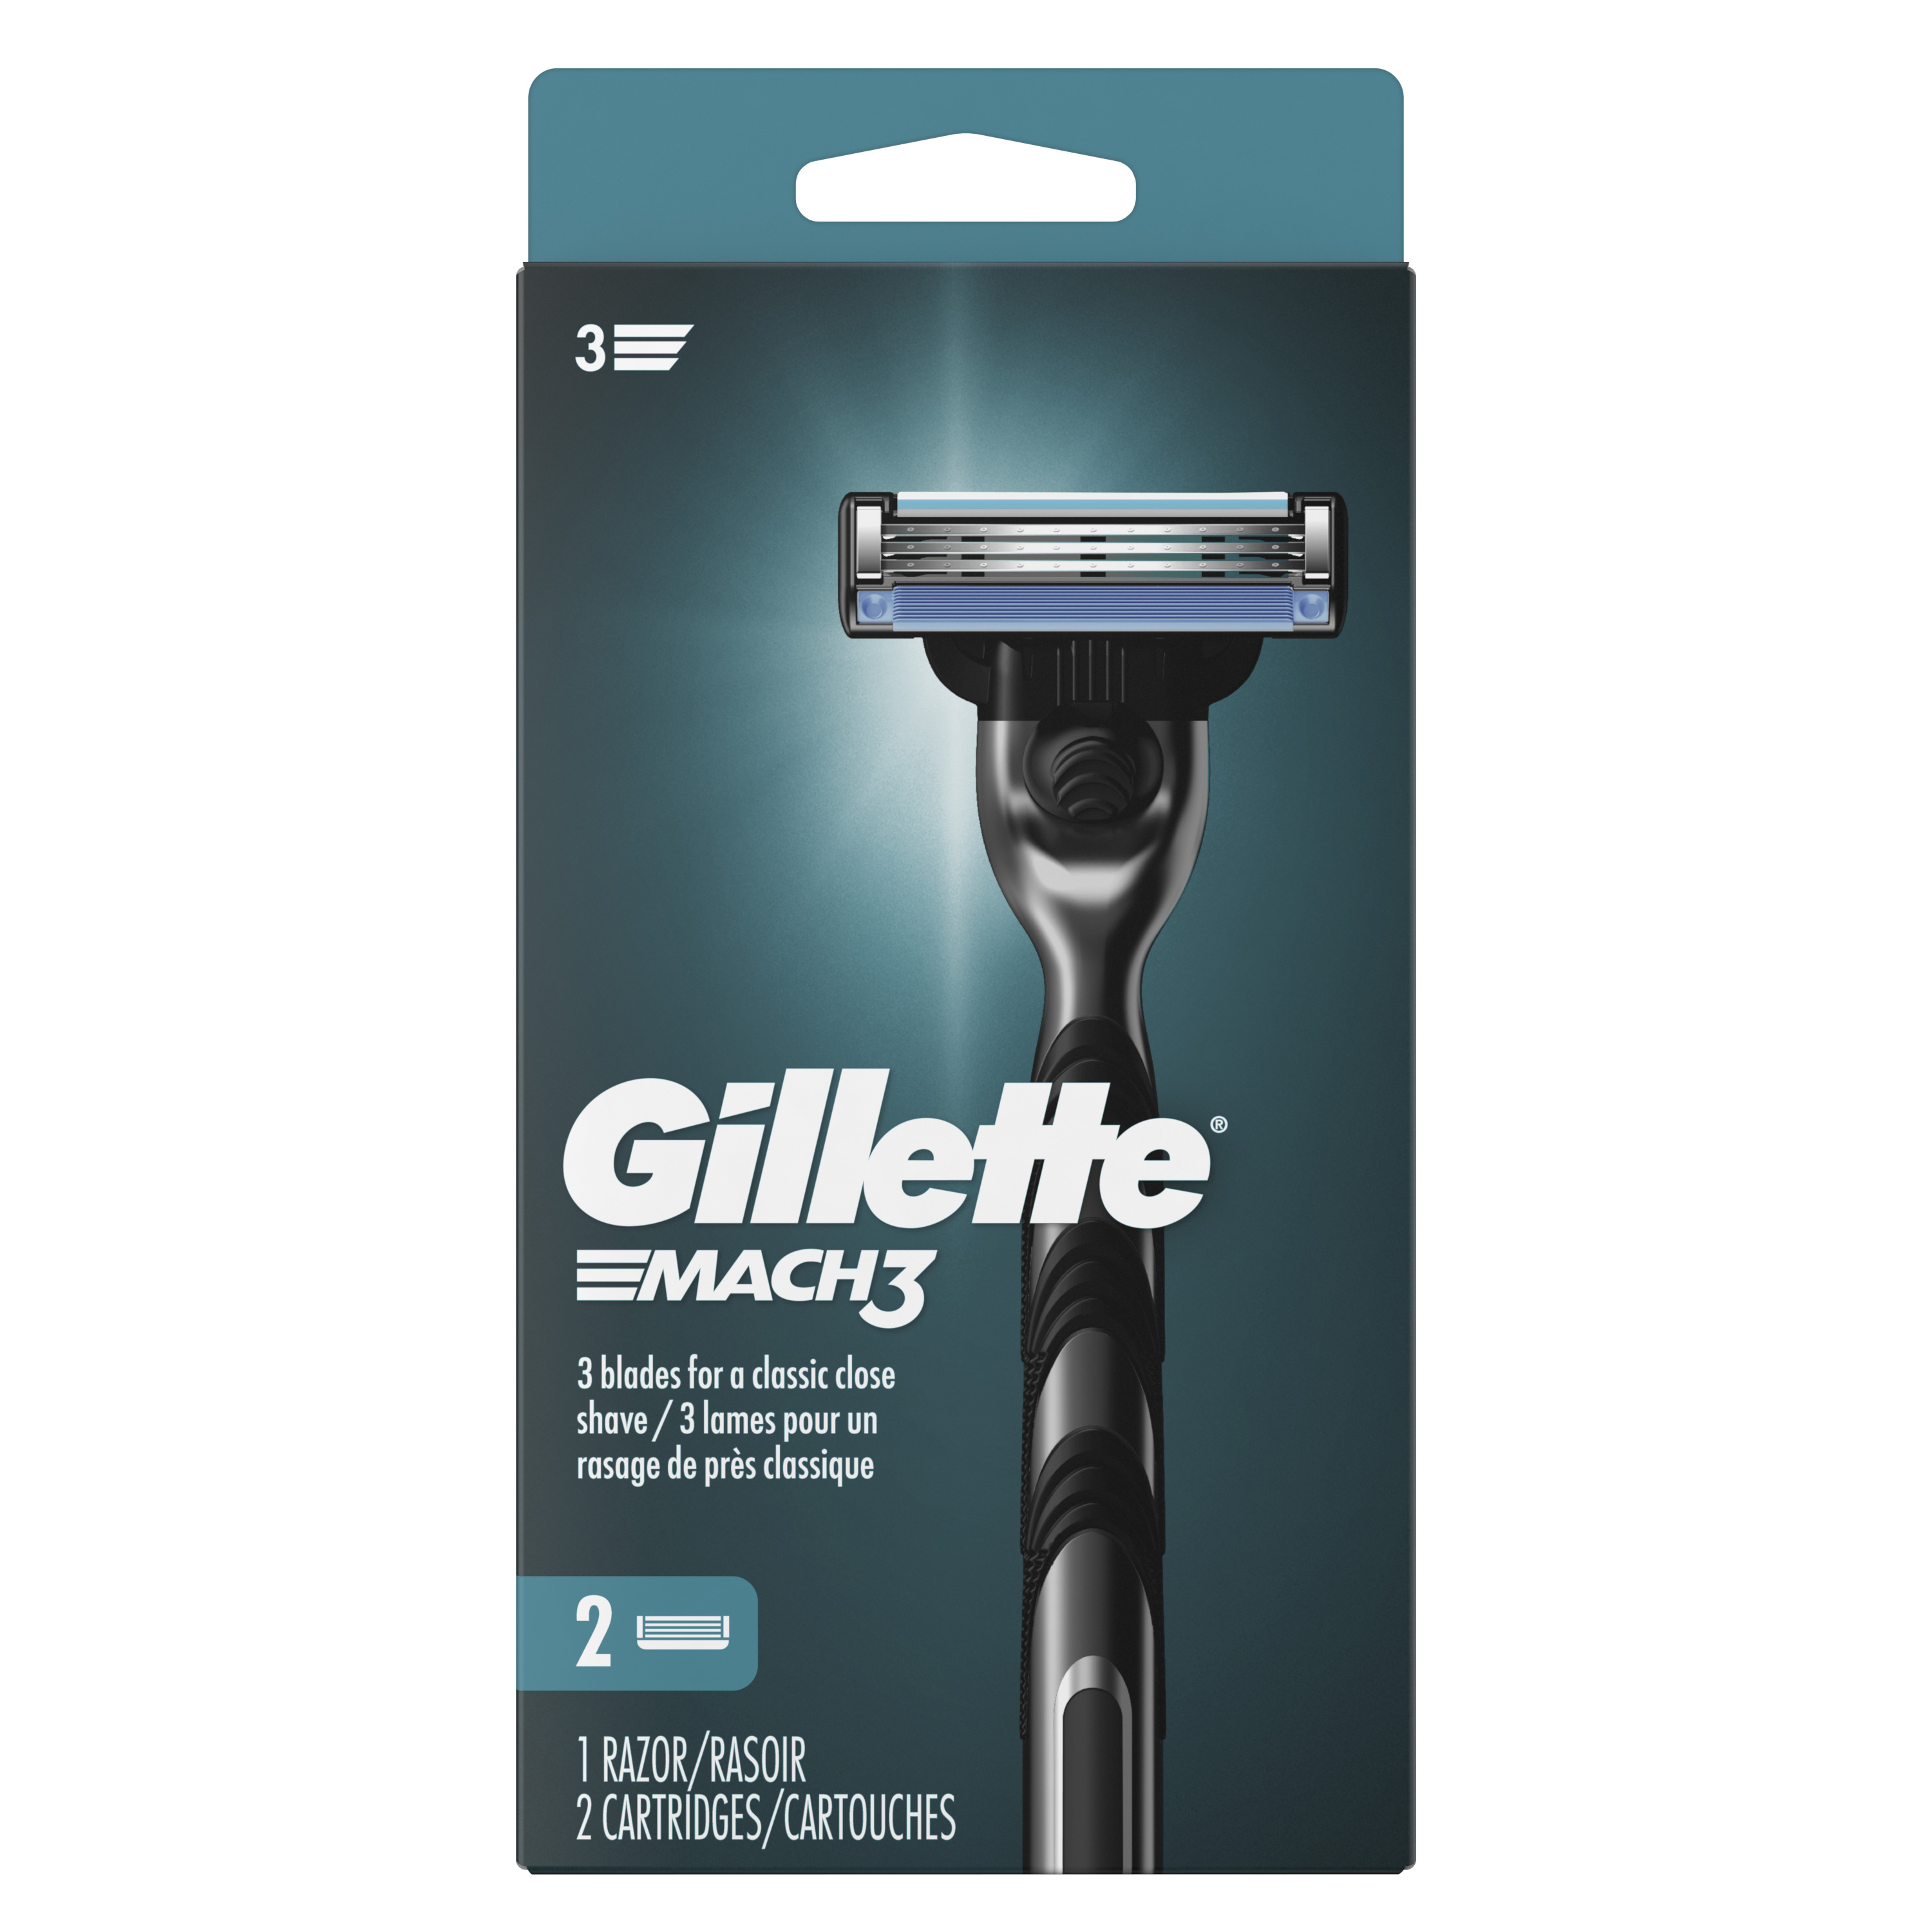 Gillette Mach3 Mens Razor Handle and 2 Blade Refills - image 3 of 9